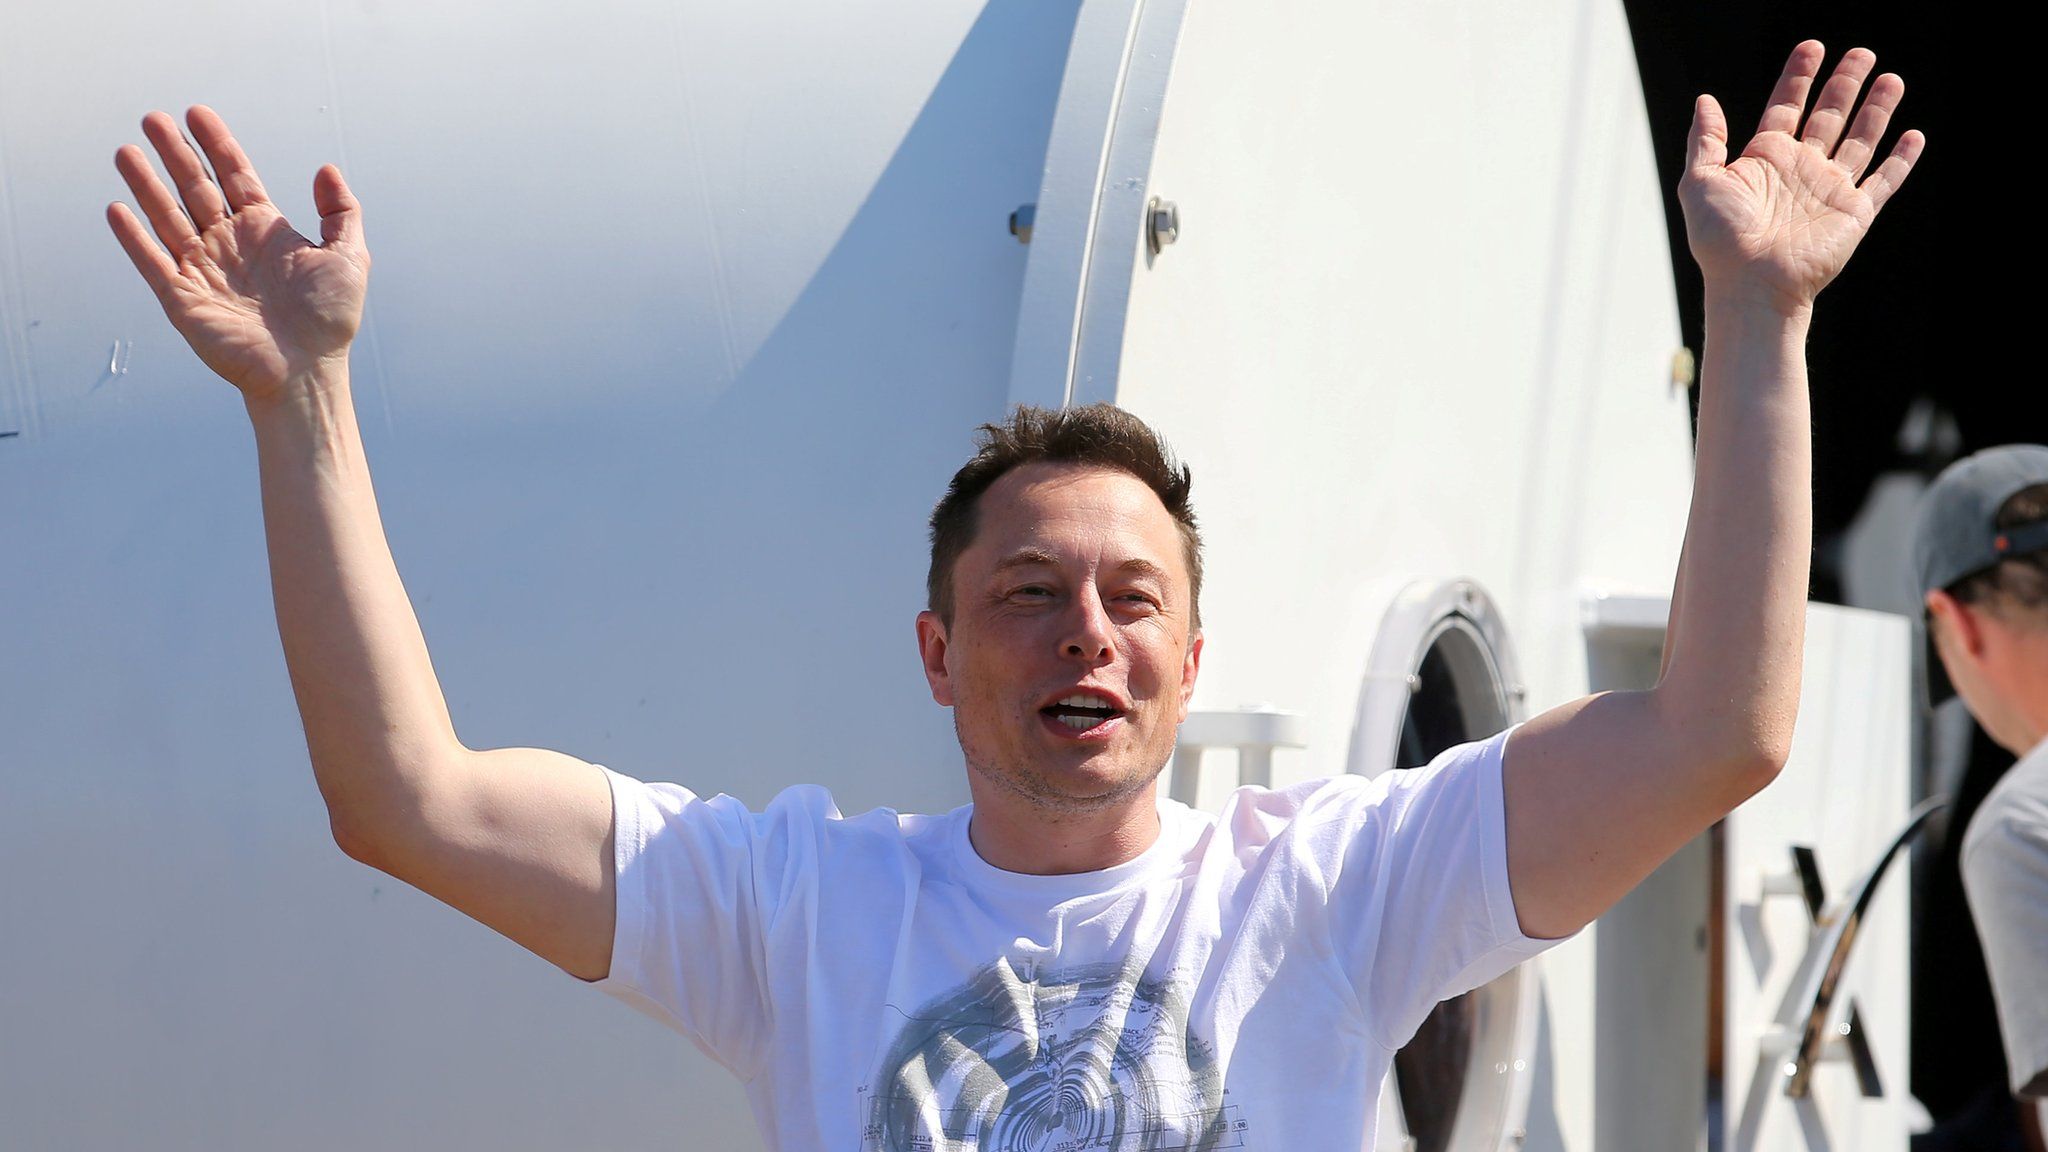 Elon Musk, founder, CEO and lead designer at SpaceX and co-founder of Tesla, in August 27, 2017.